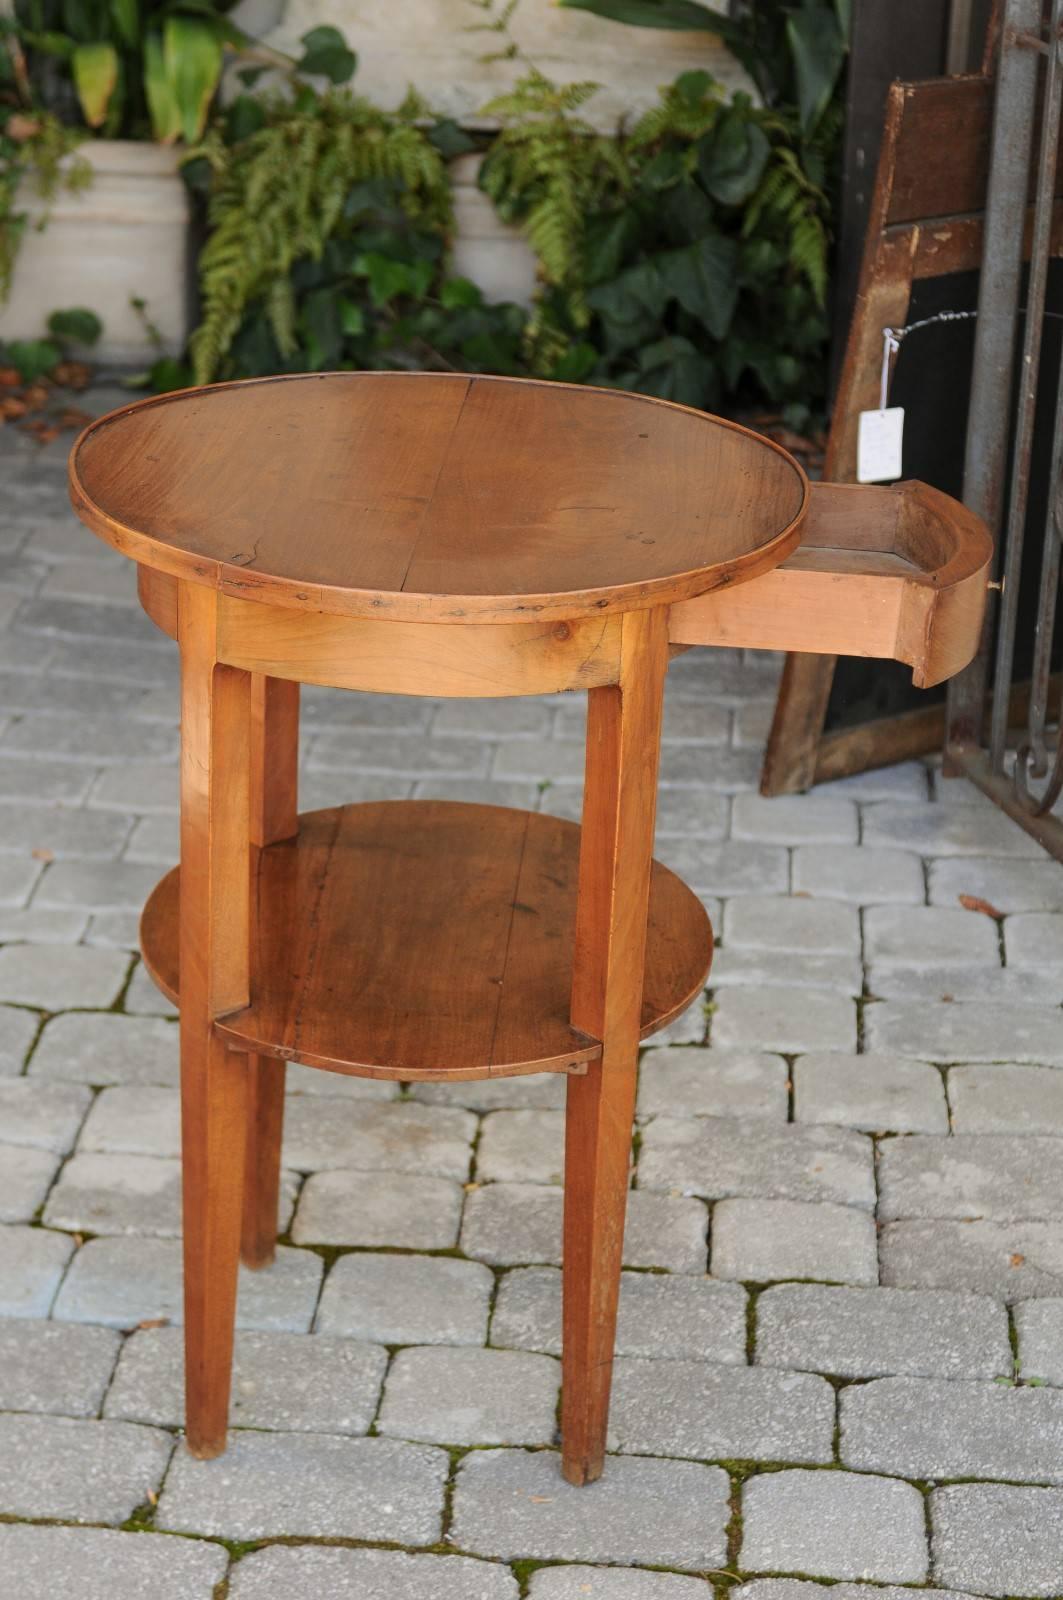 French Circular Side Table with Single Drawer and Lower Shelf from the 1840s 2